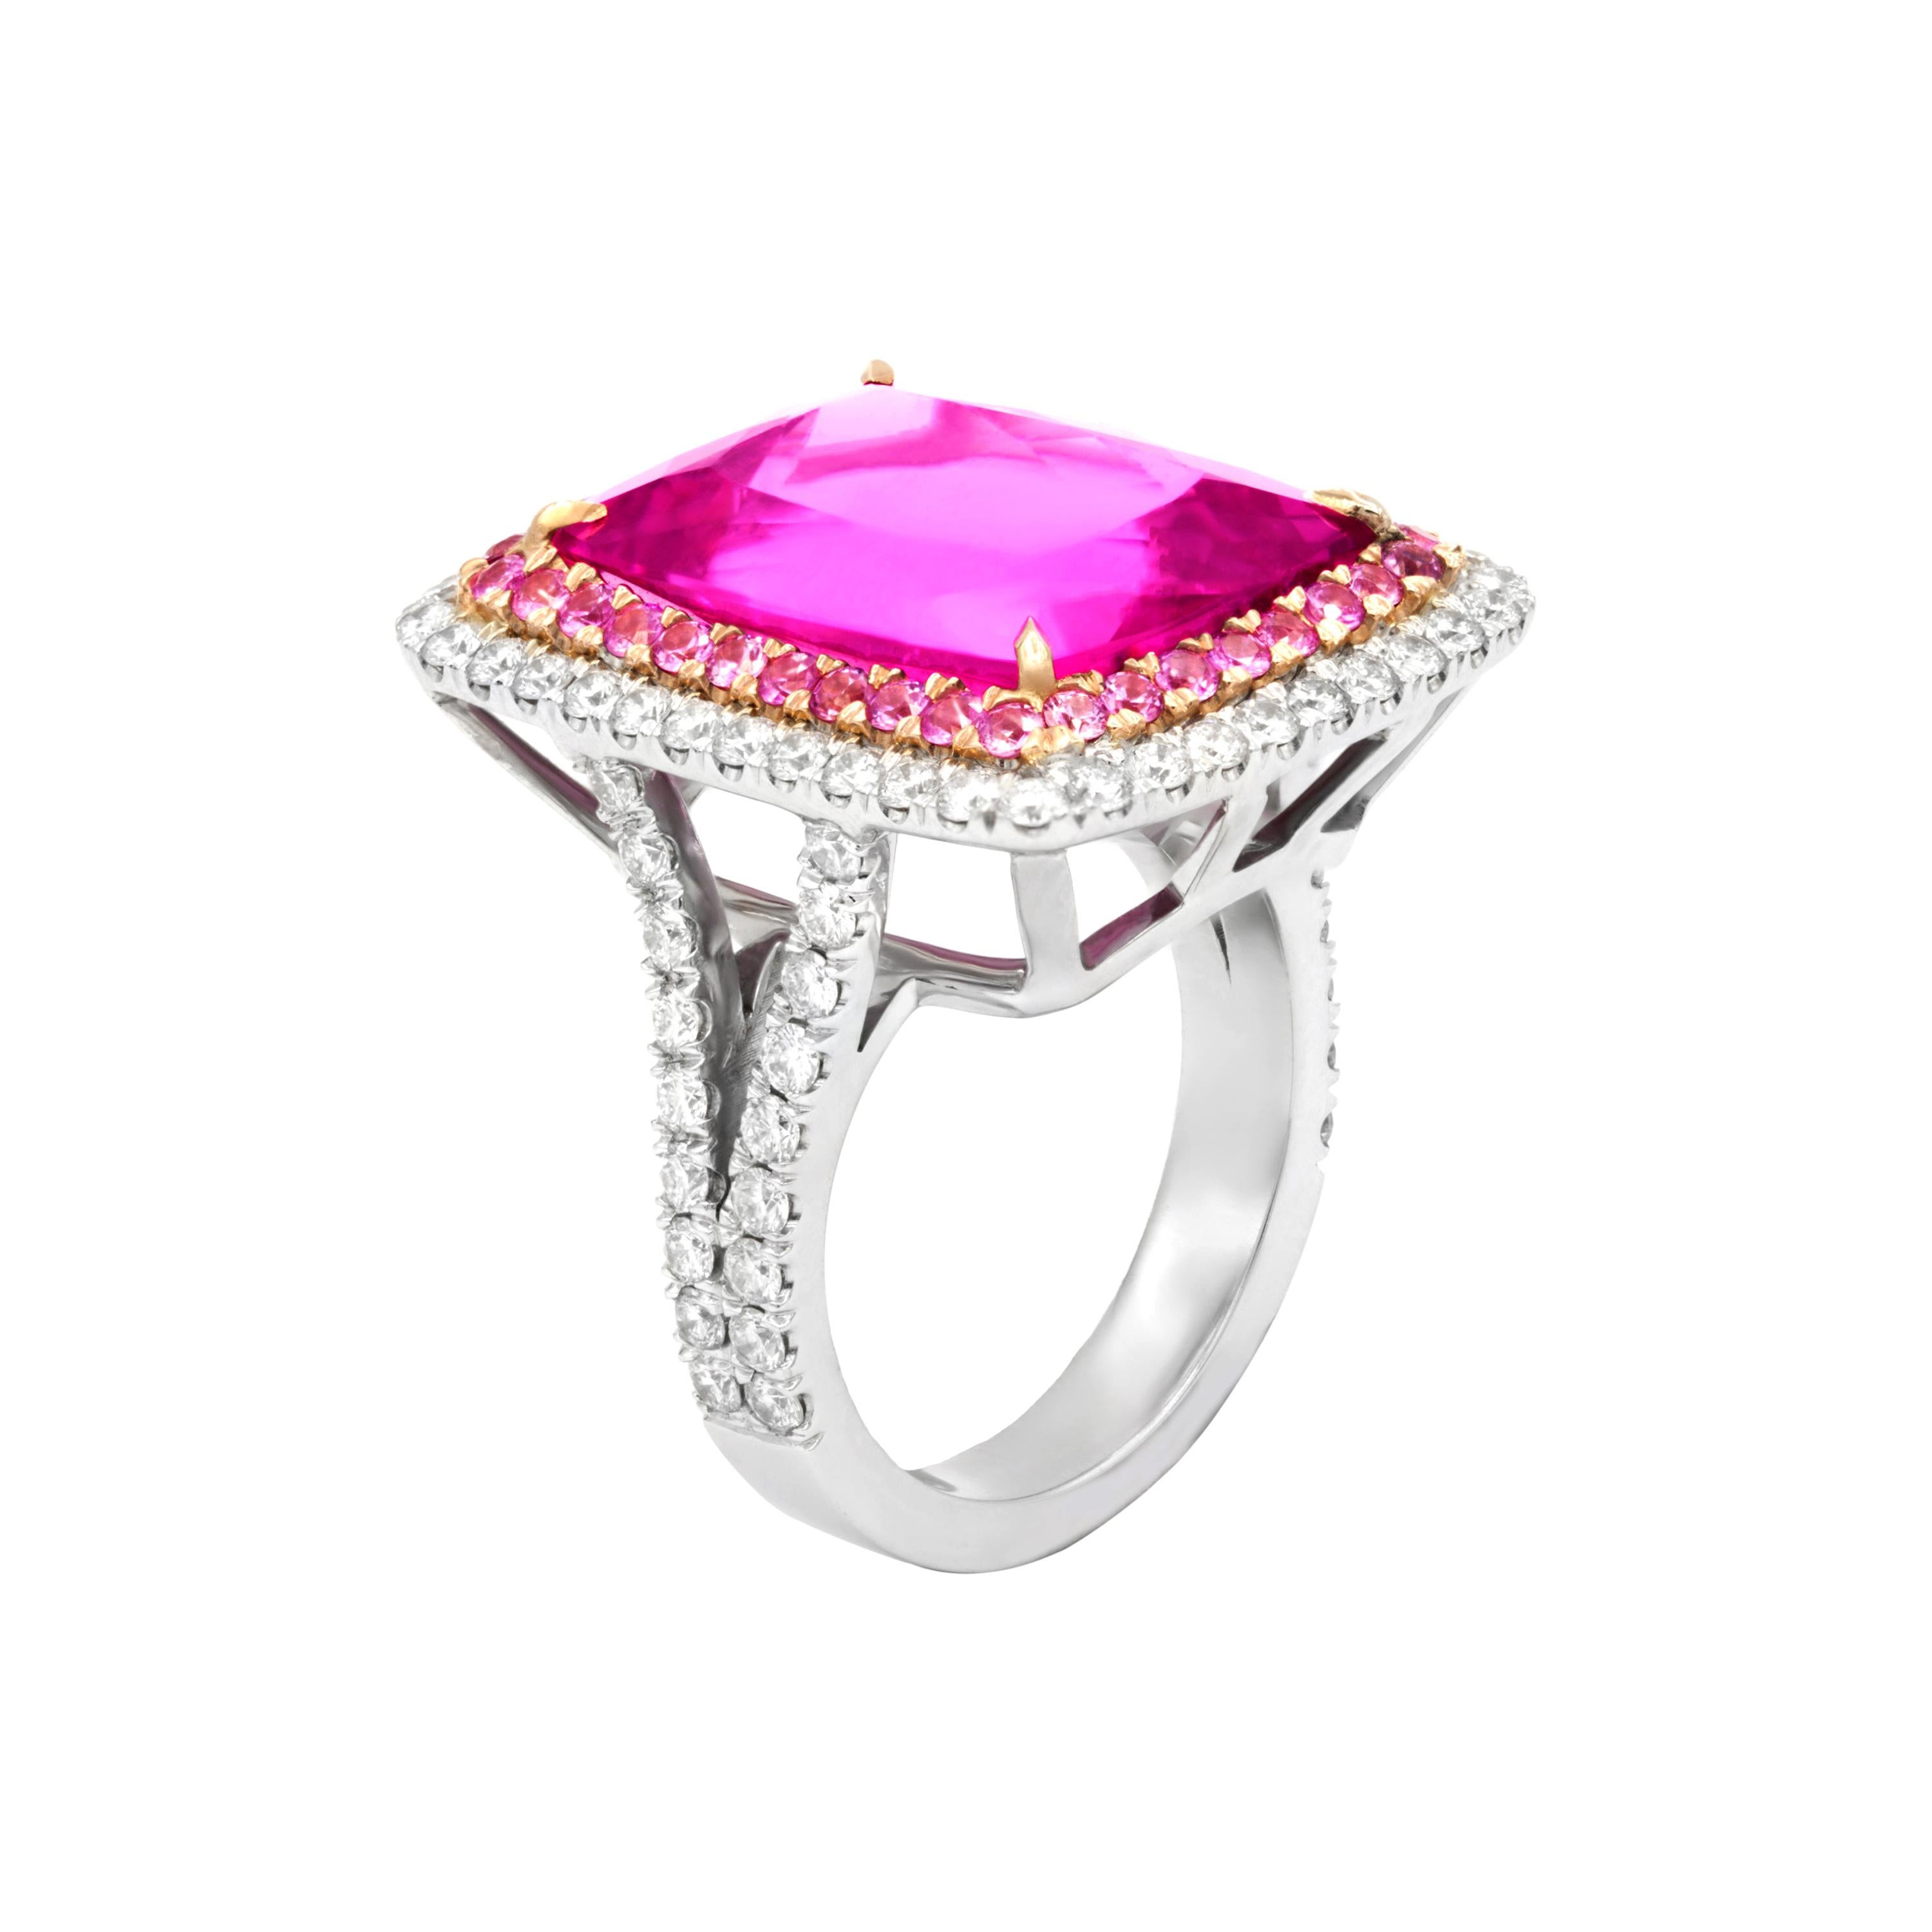 18kt White Gold Magnificent Pink (Rubelite) Tourmaline Diamond Ring With 16.61ct Of Pink Tourmaline Set In Double Halo Setting With .90ct Of Pink Sapphires And 1.50ct Of Micropave Diamonds.
Diana M. is a leading supplier of top-quality fine jewelry